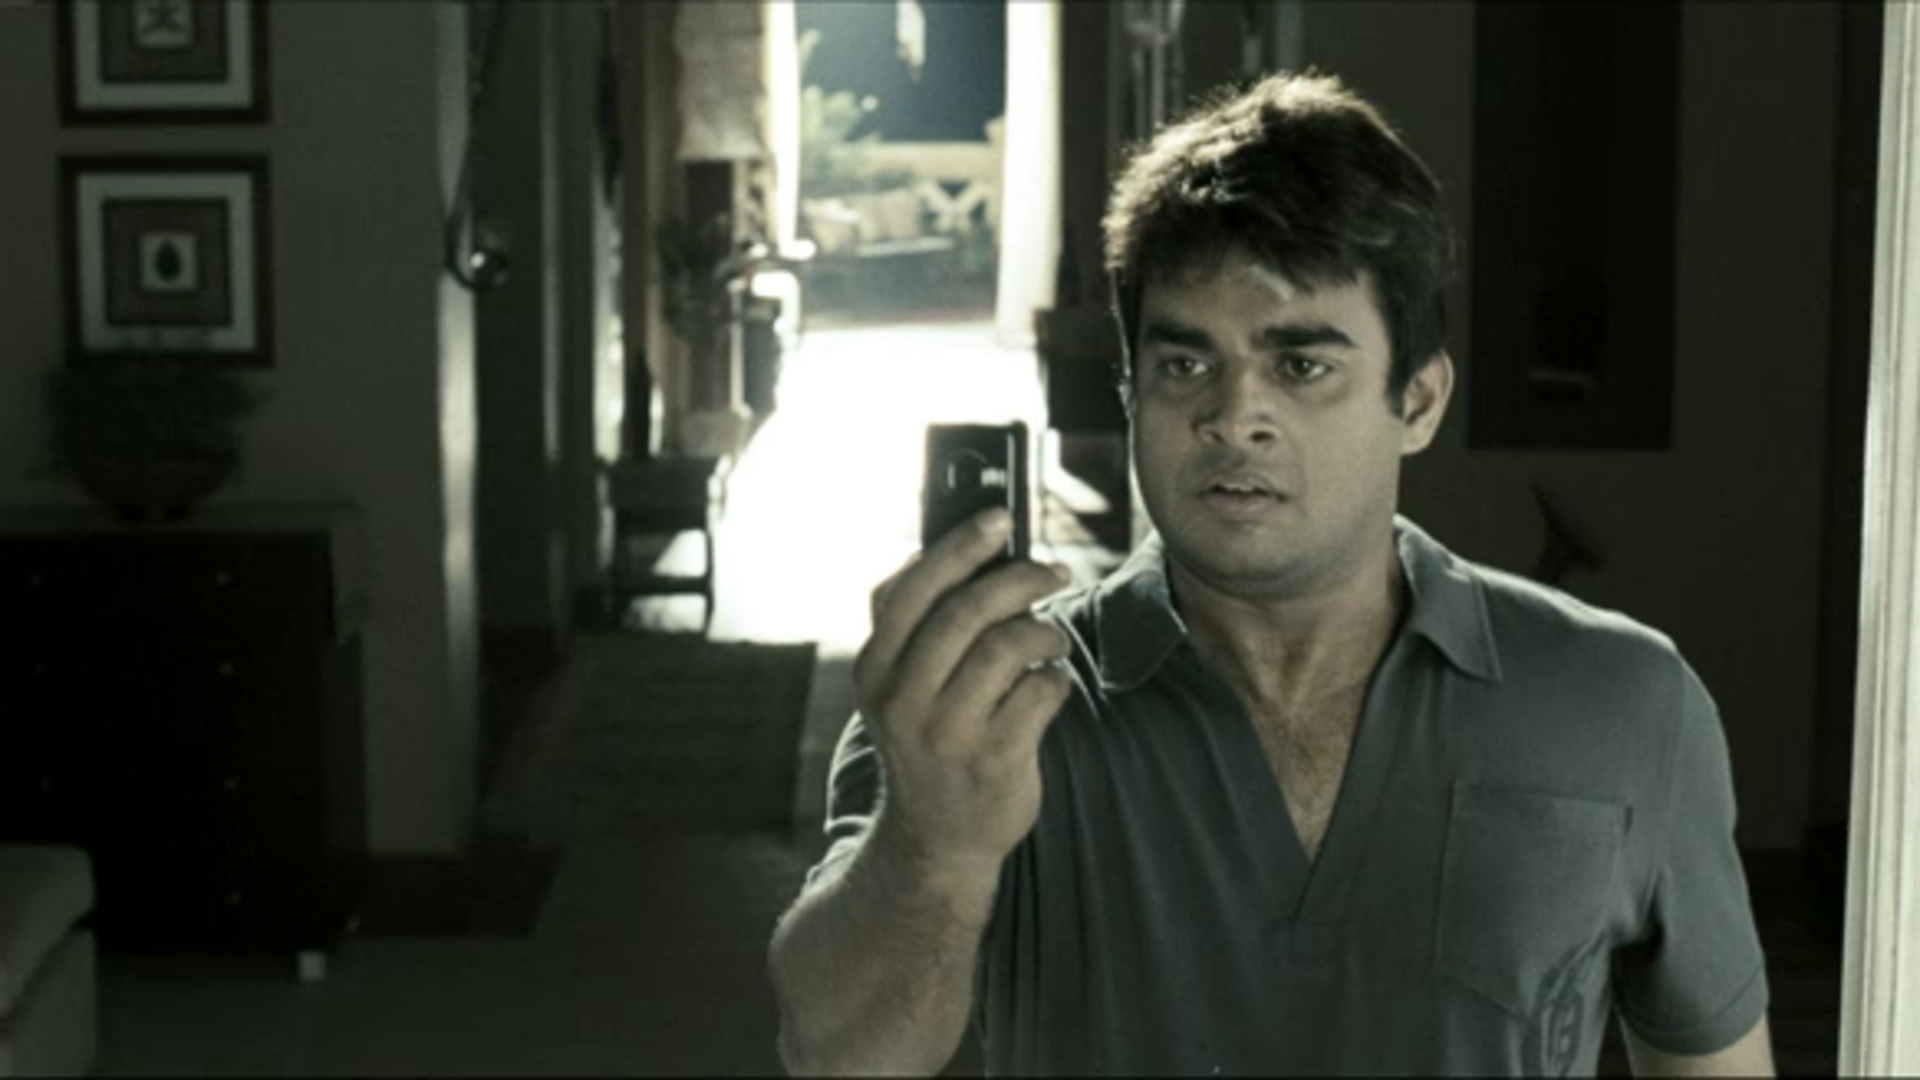 Still of Madhavan from the movie, looking into a phone